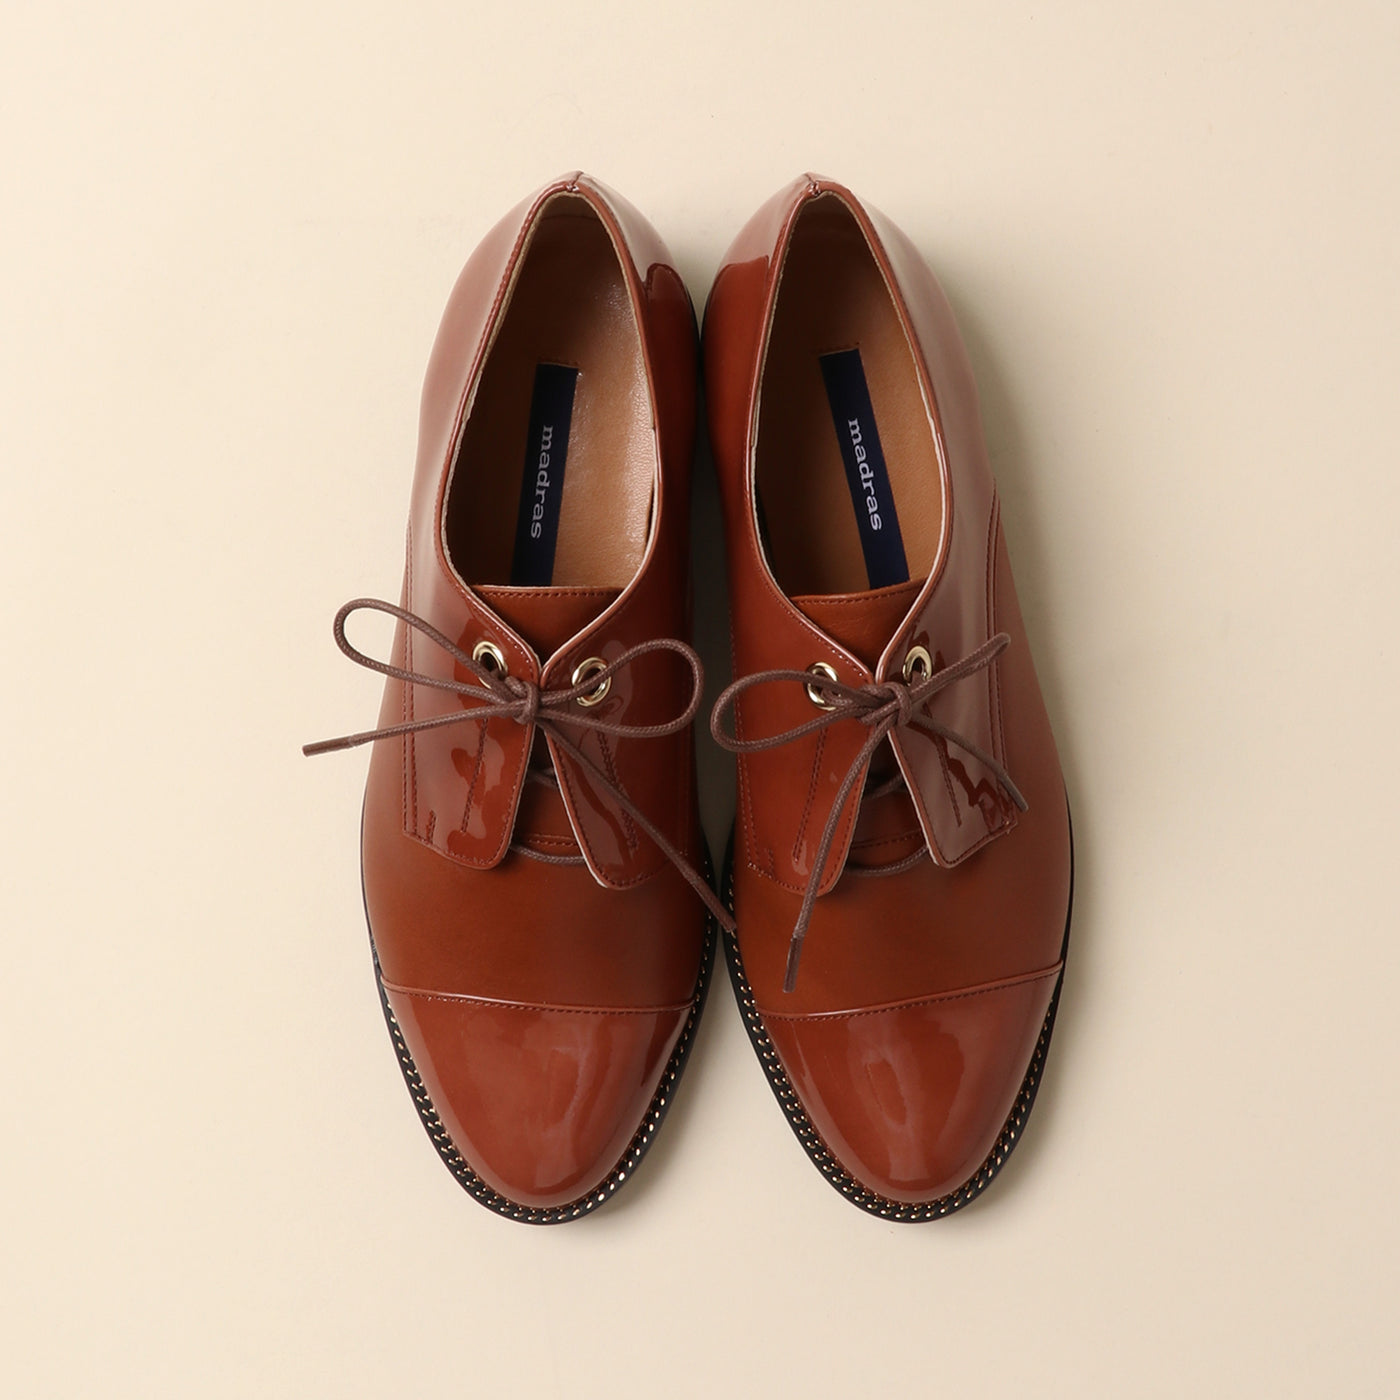 <Madras> Lace-up Casual Shoes / Camel Enamel